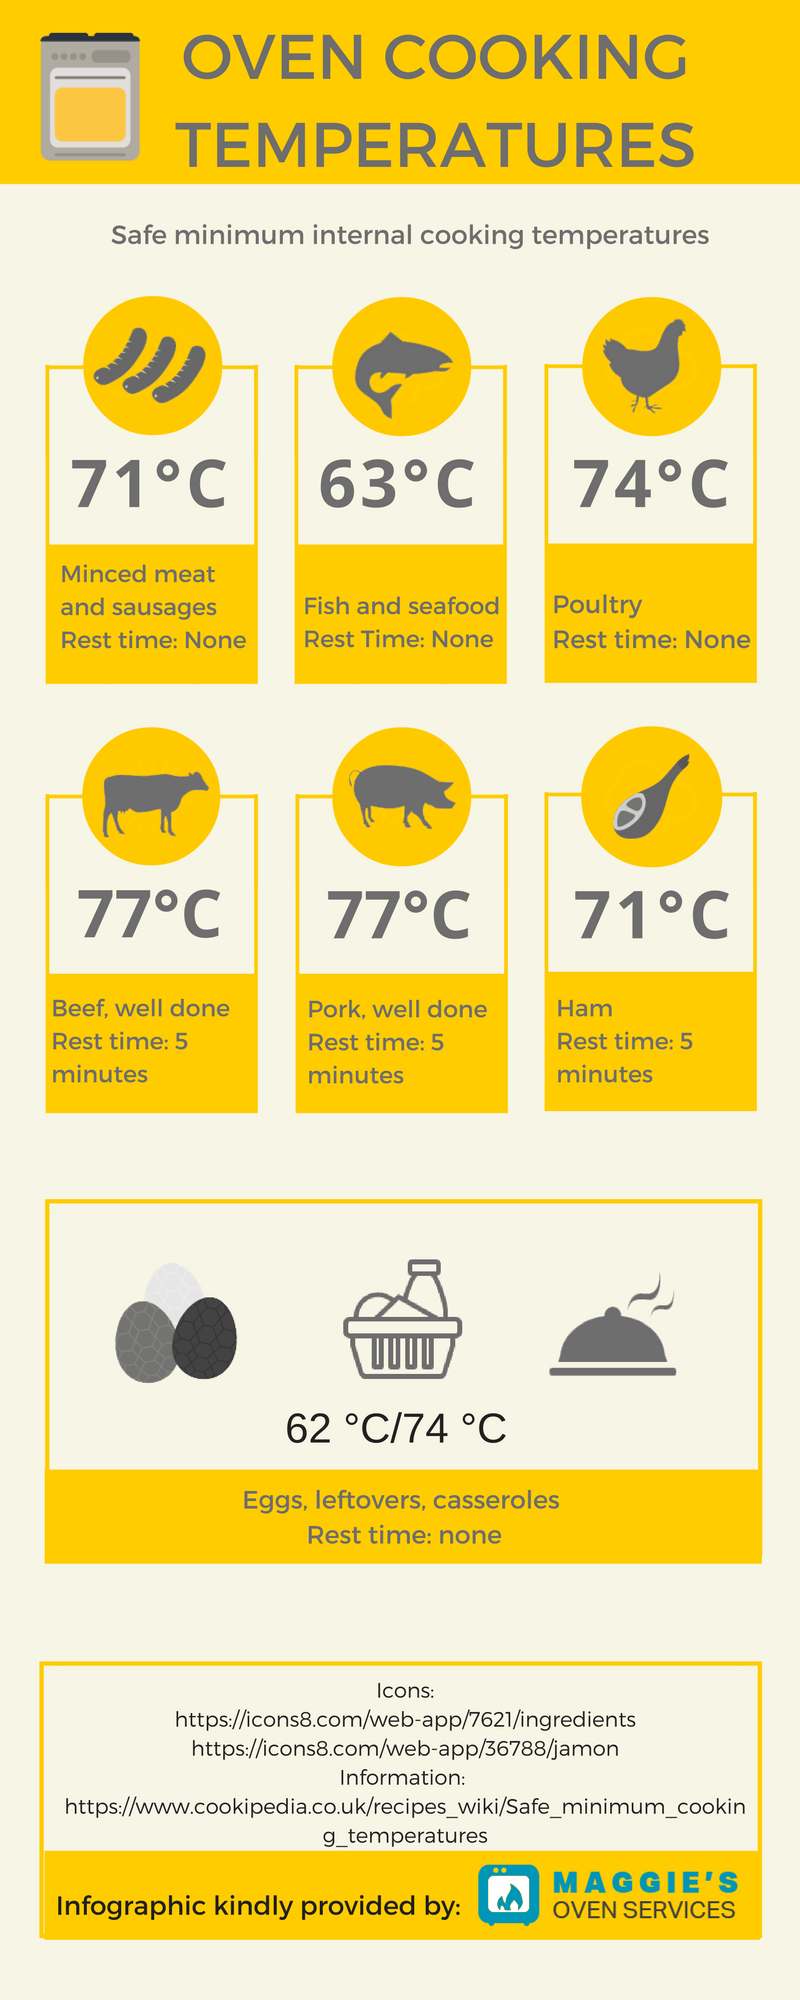 Oven Cooking Temperatures [Infographic] Maggie's Oven Services